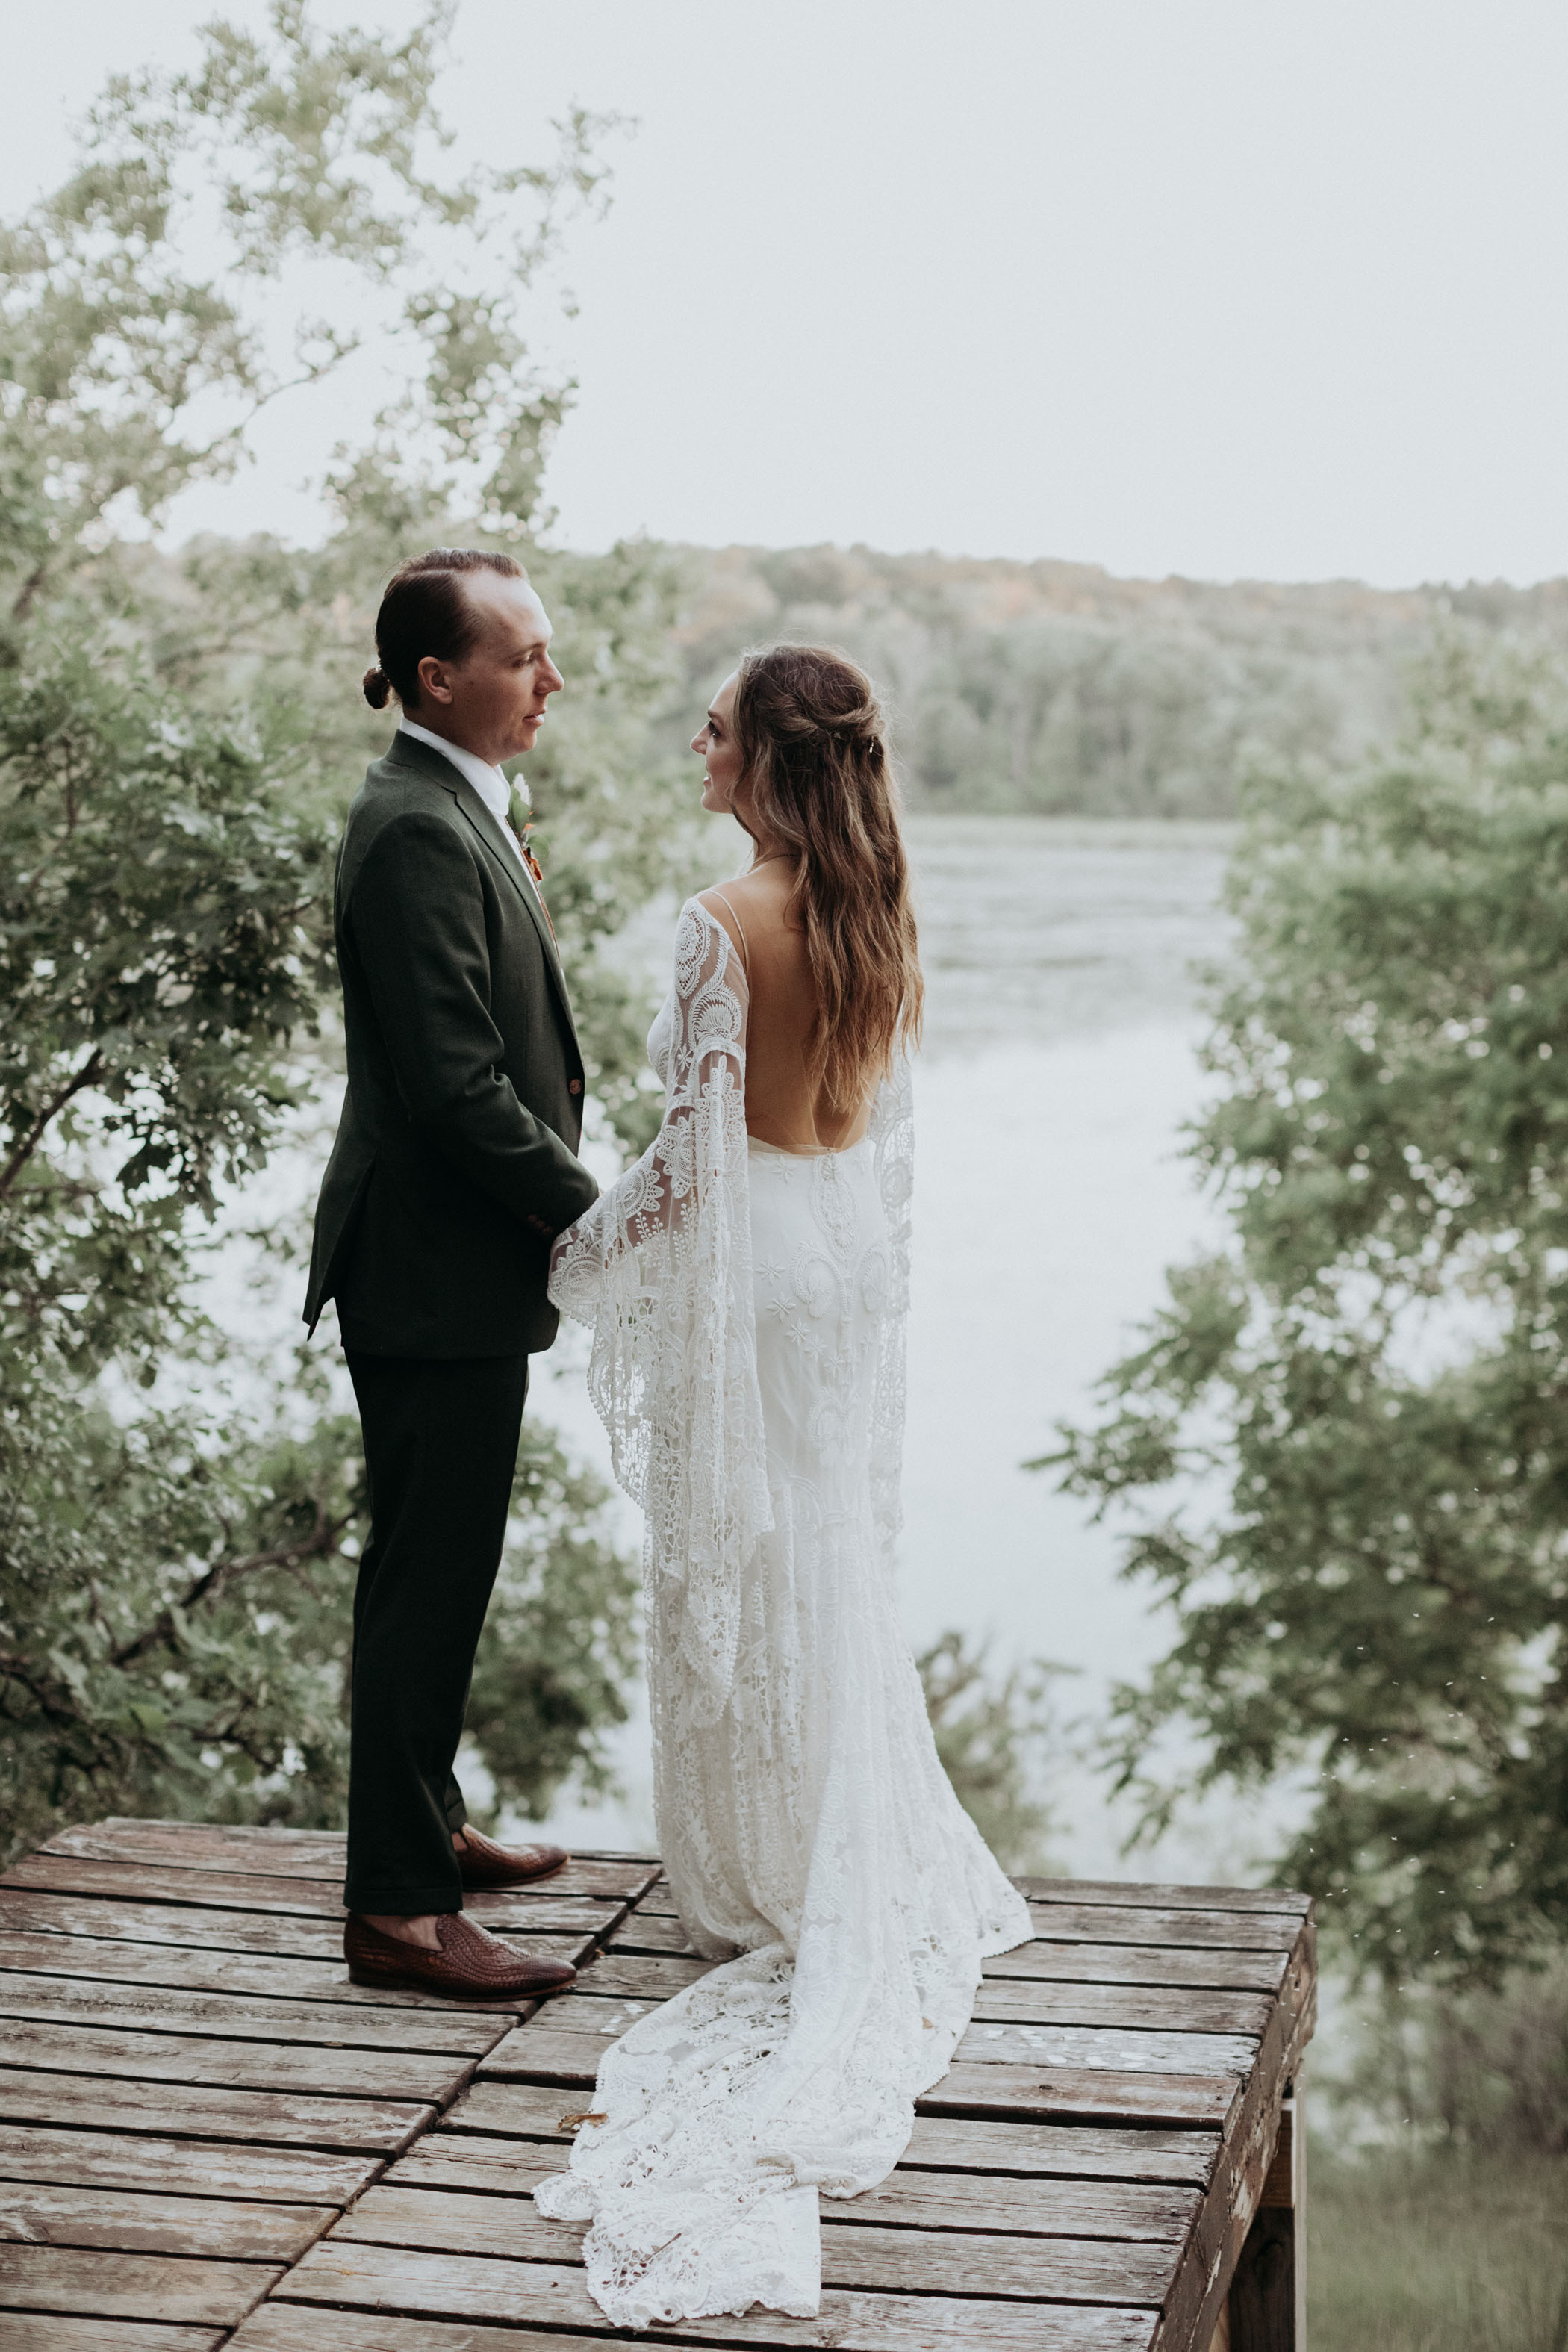 Bride and groom looking at each other lovingly on a dock